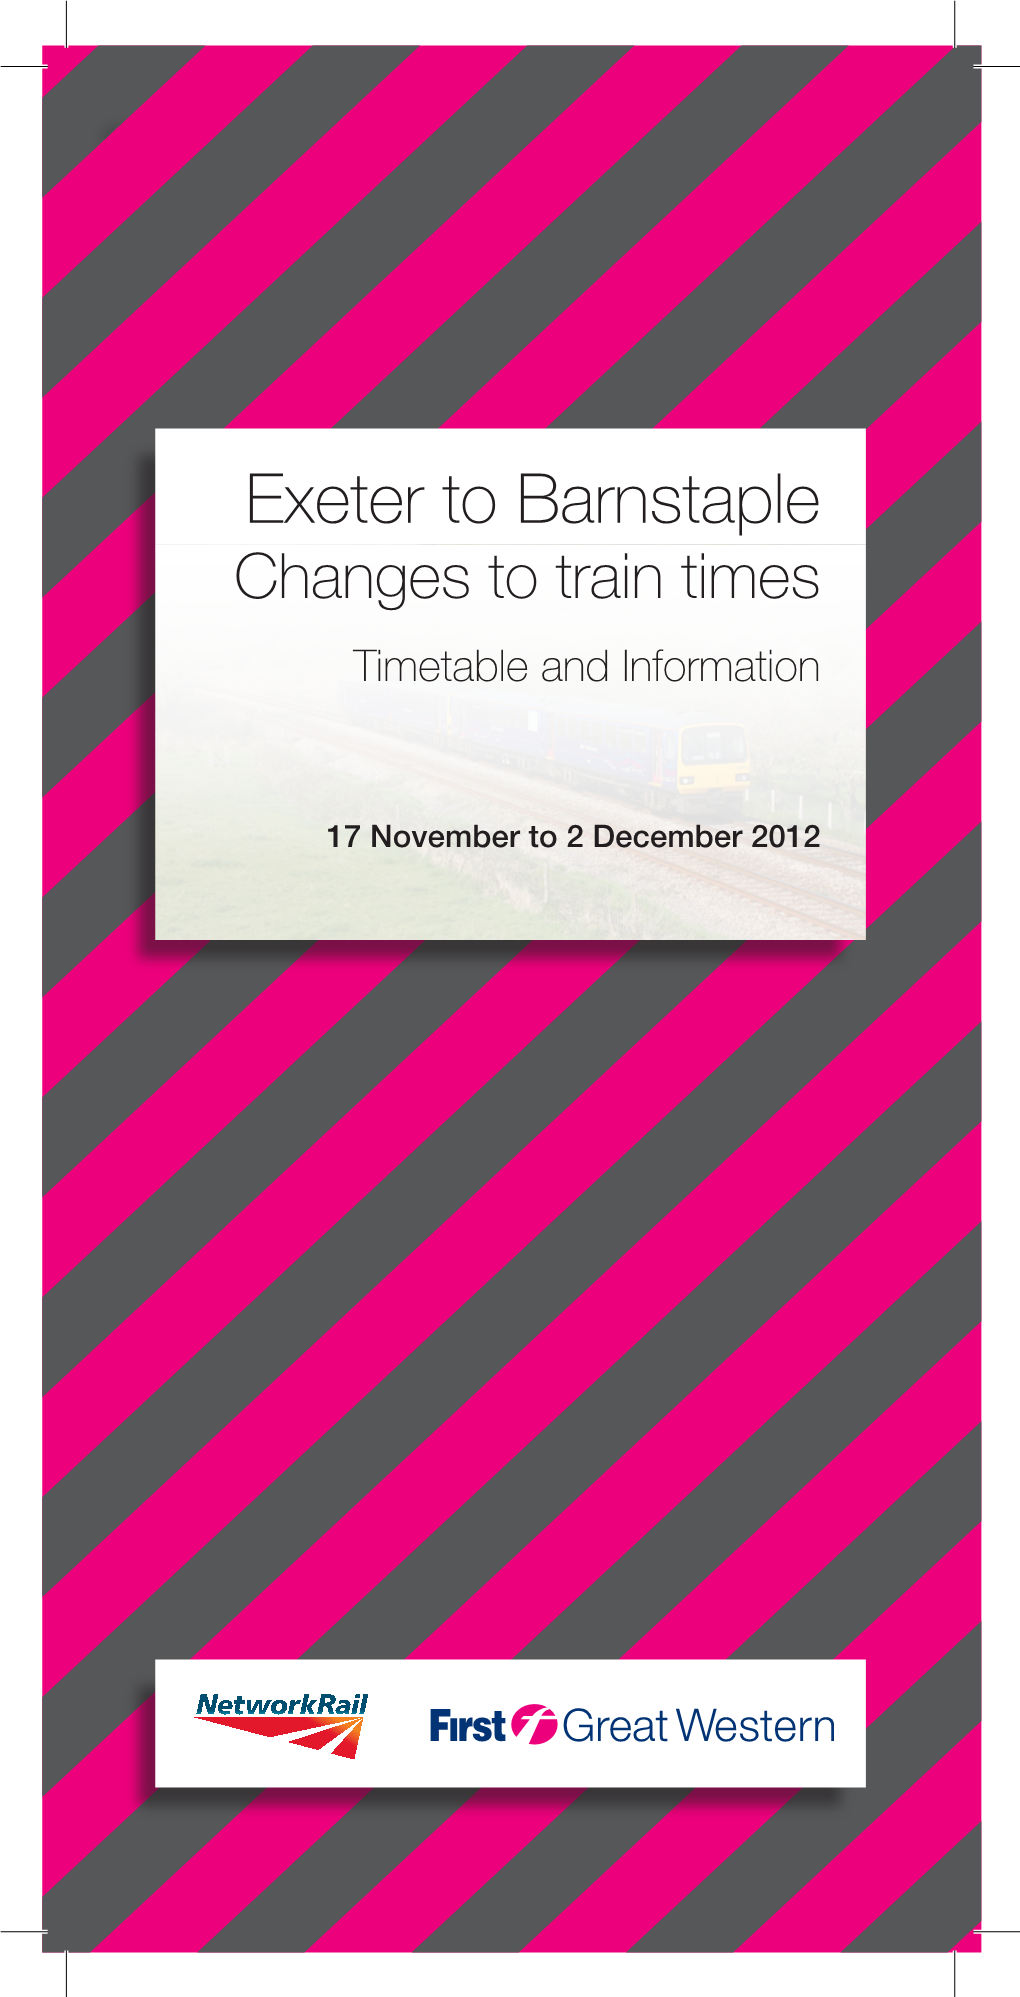 Exeter to Barnstaple Changes to Train Times Timetable and Information